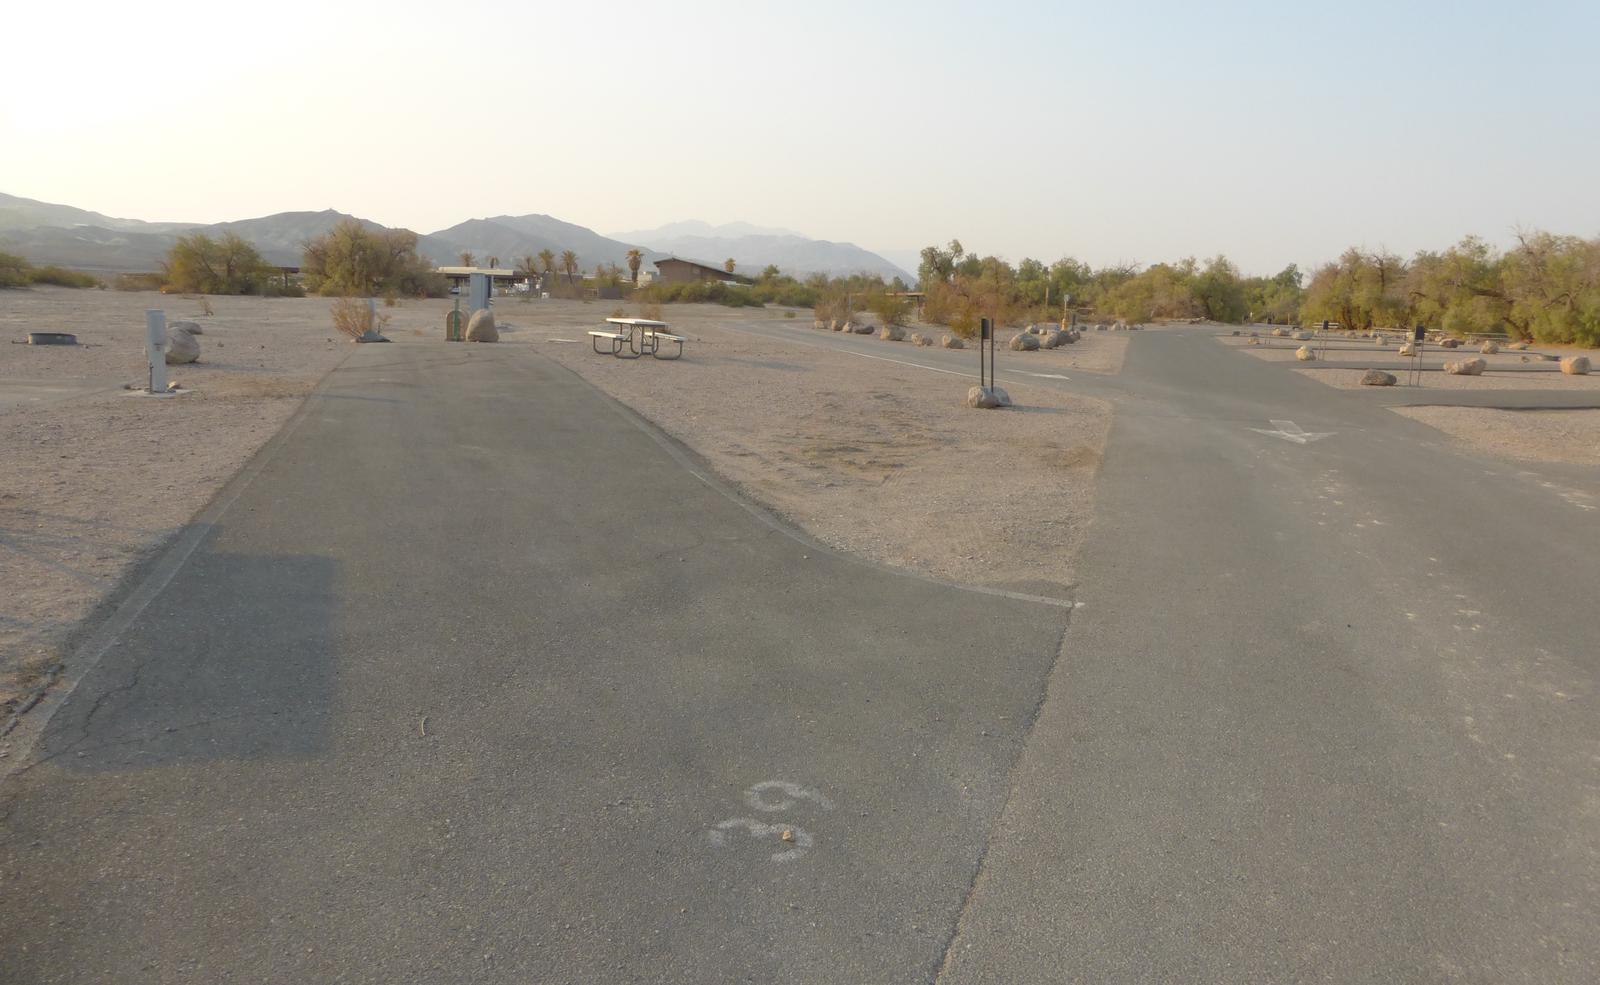 Furnace Creek Campground full hookup site #39. Water, sewer, and 30/50 amp electric connection. One fire pit and one picnic table.